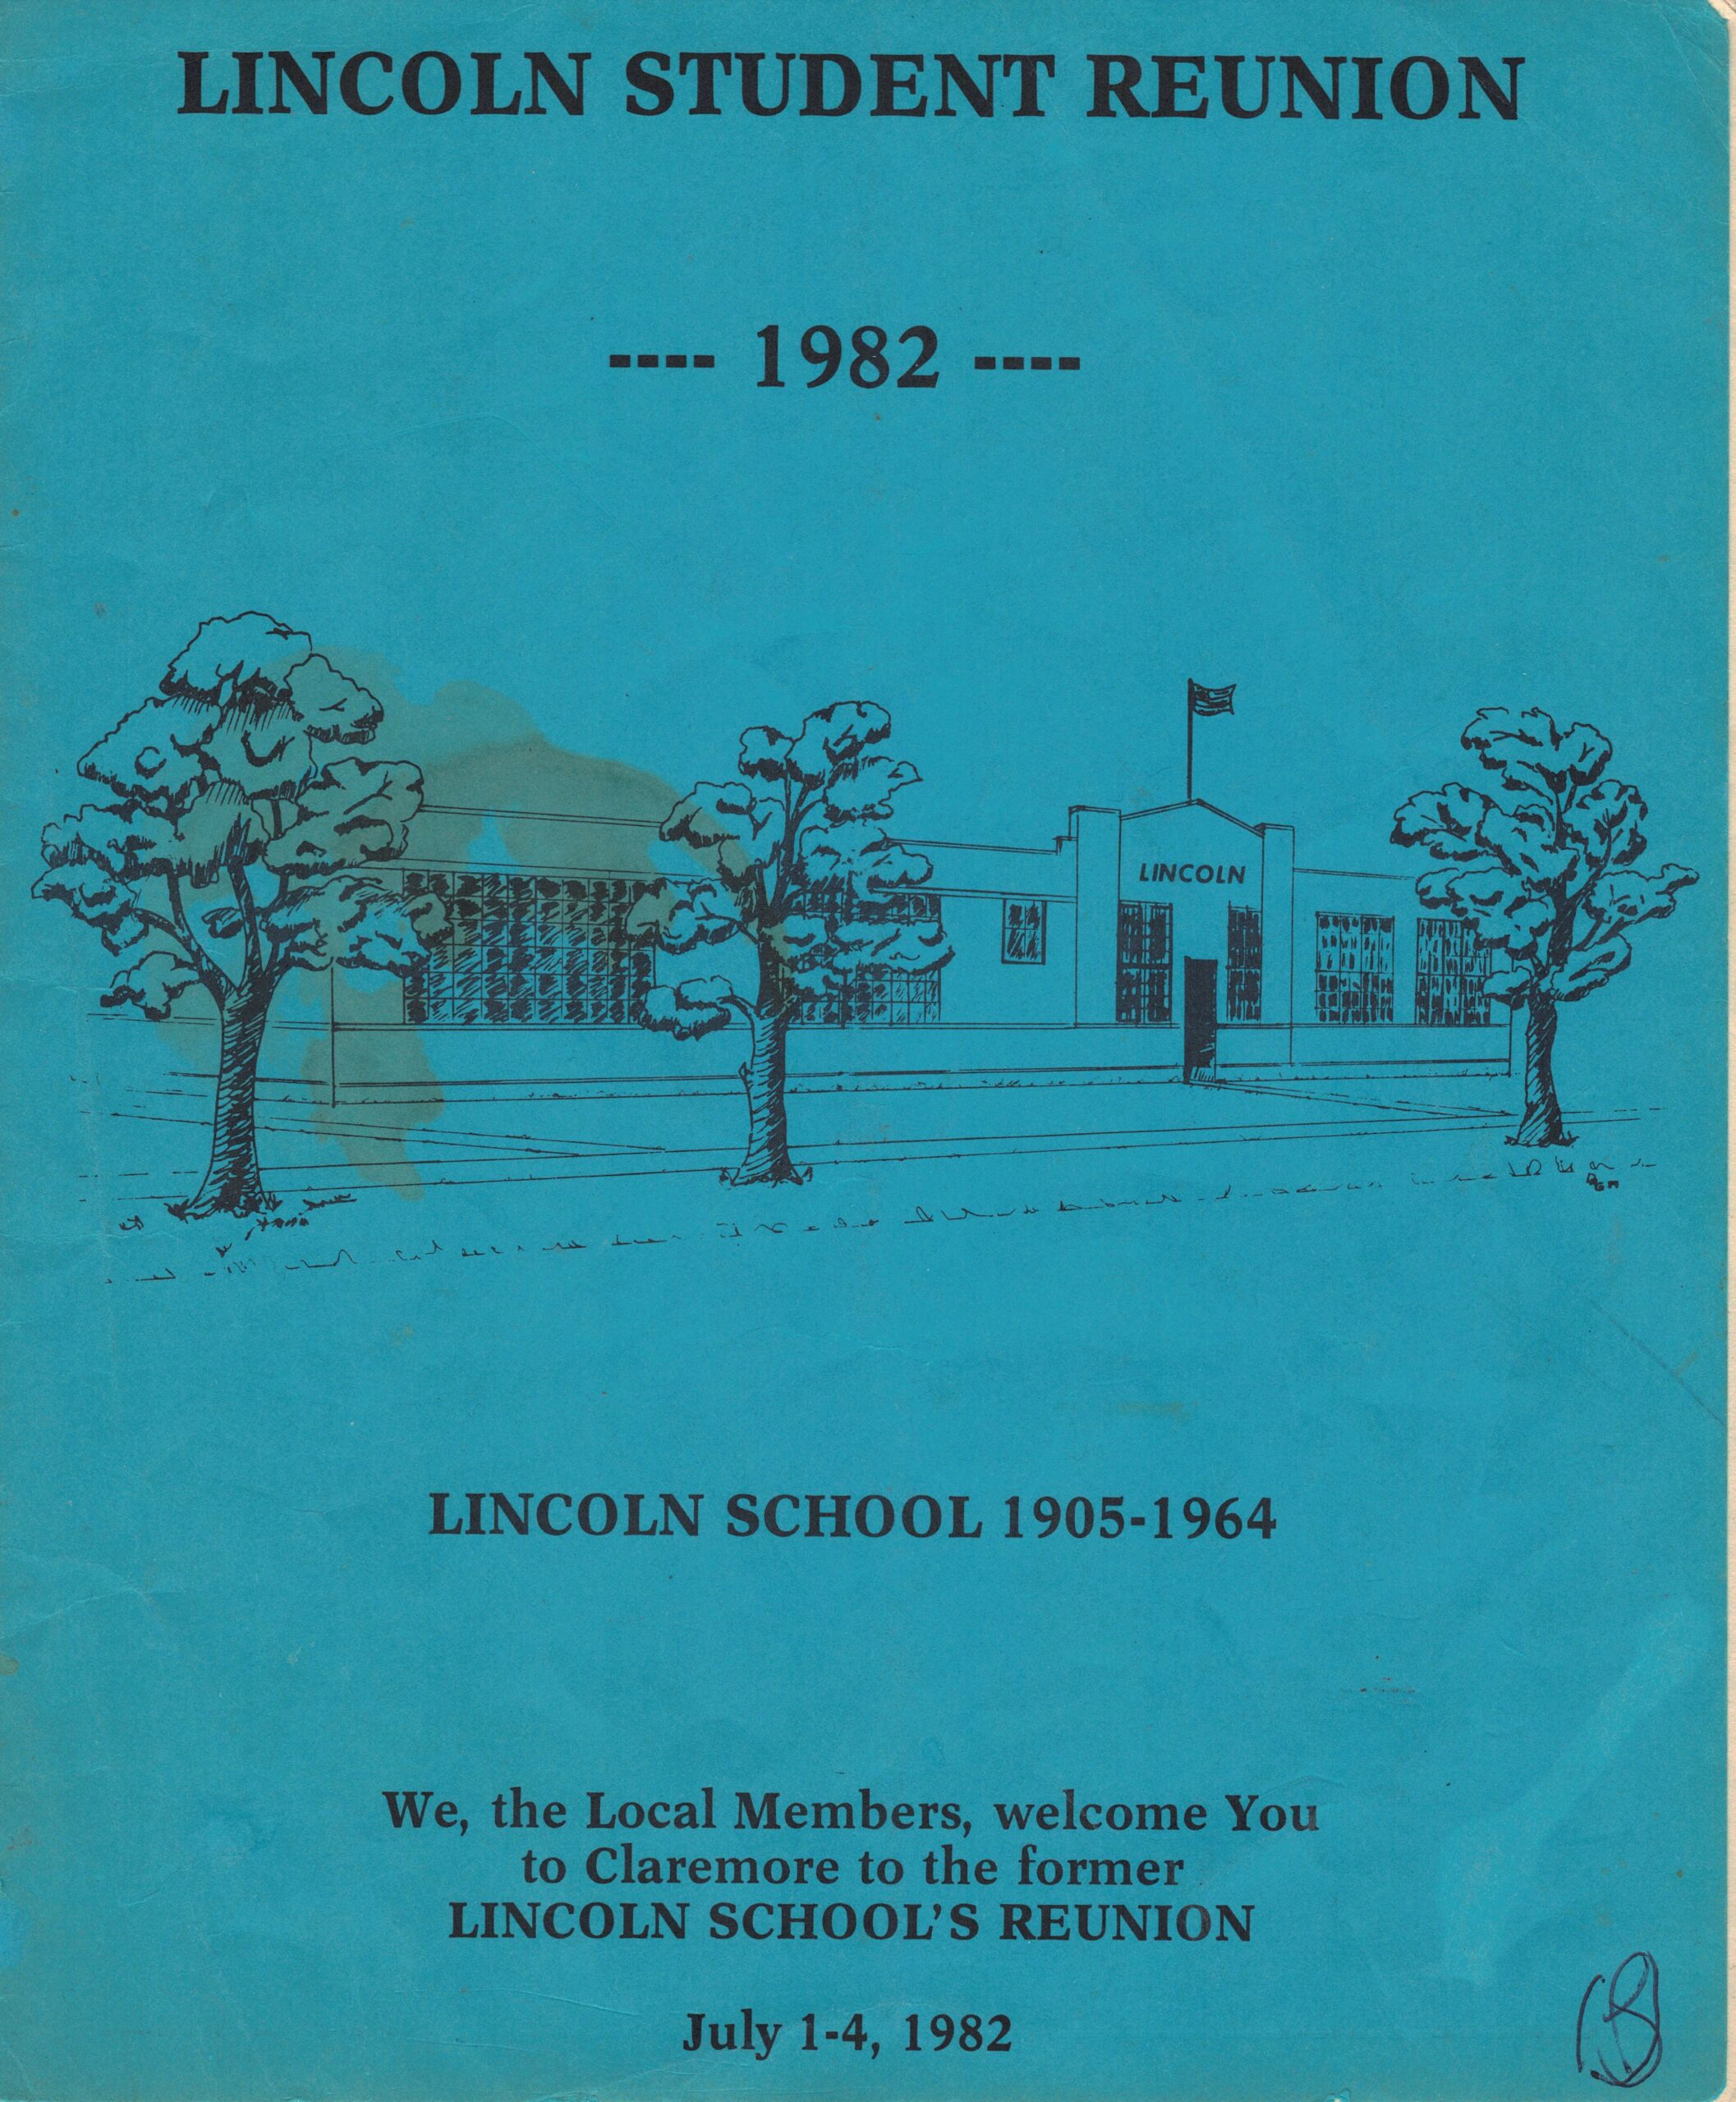 Blue paper front page of the 1982 Lincoln Student Reunion with line ink drawing of Lincoln School building with trees.